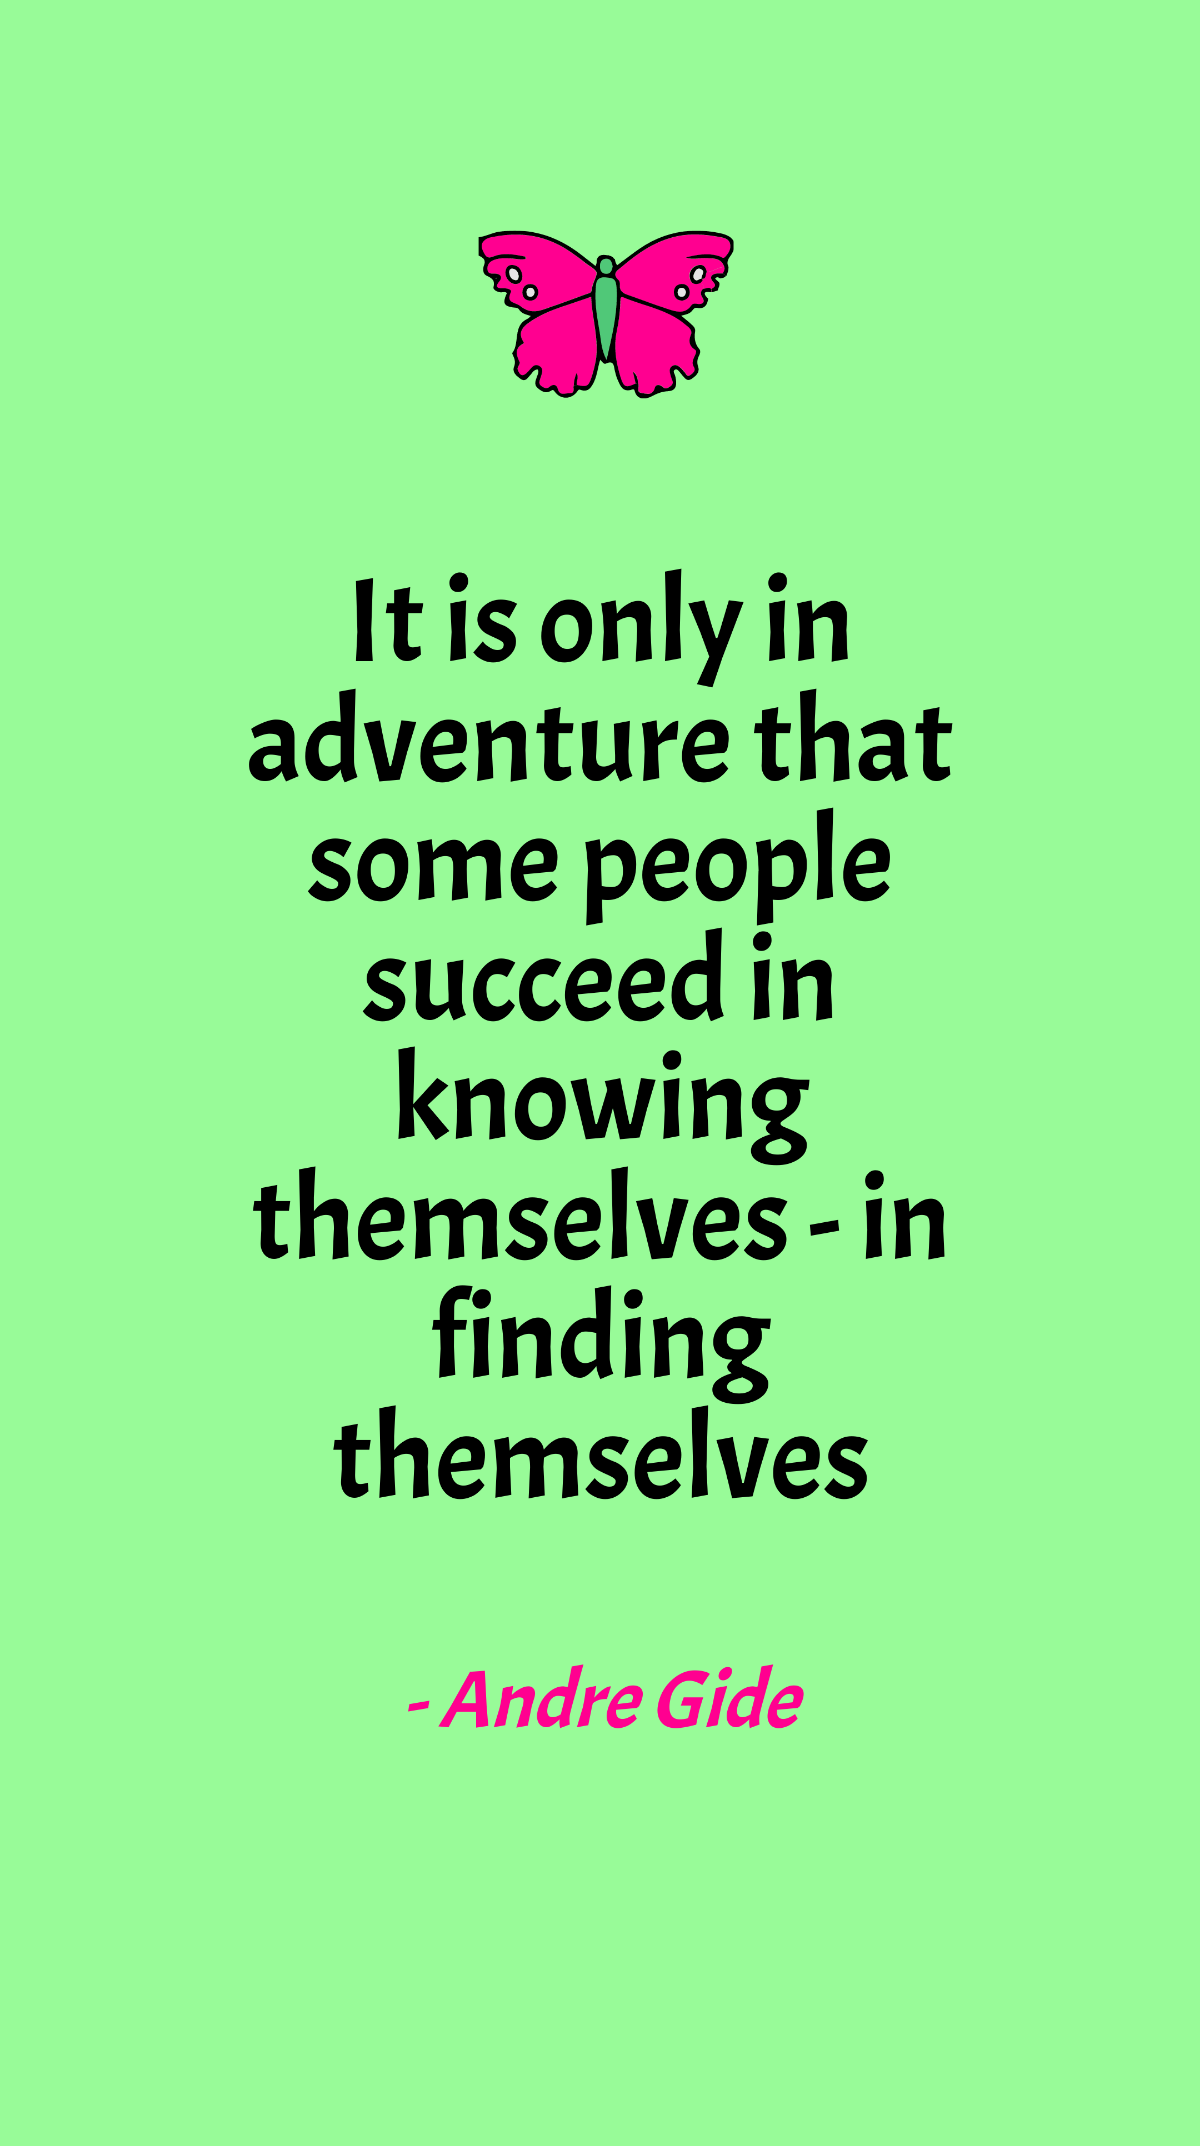 Andre Gide - It is only in adventure that some people succeed in knowing themselves - in finding themselves